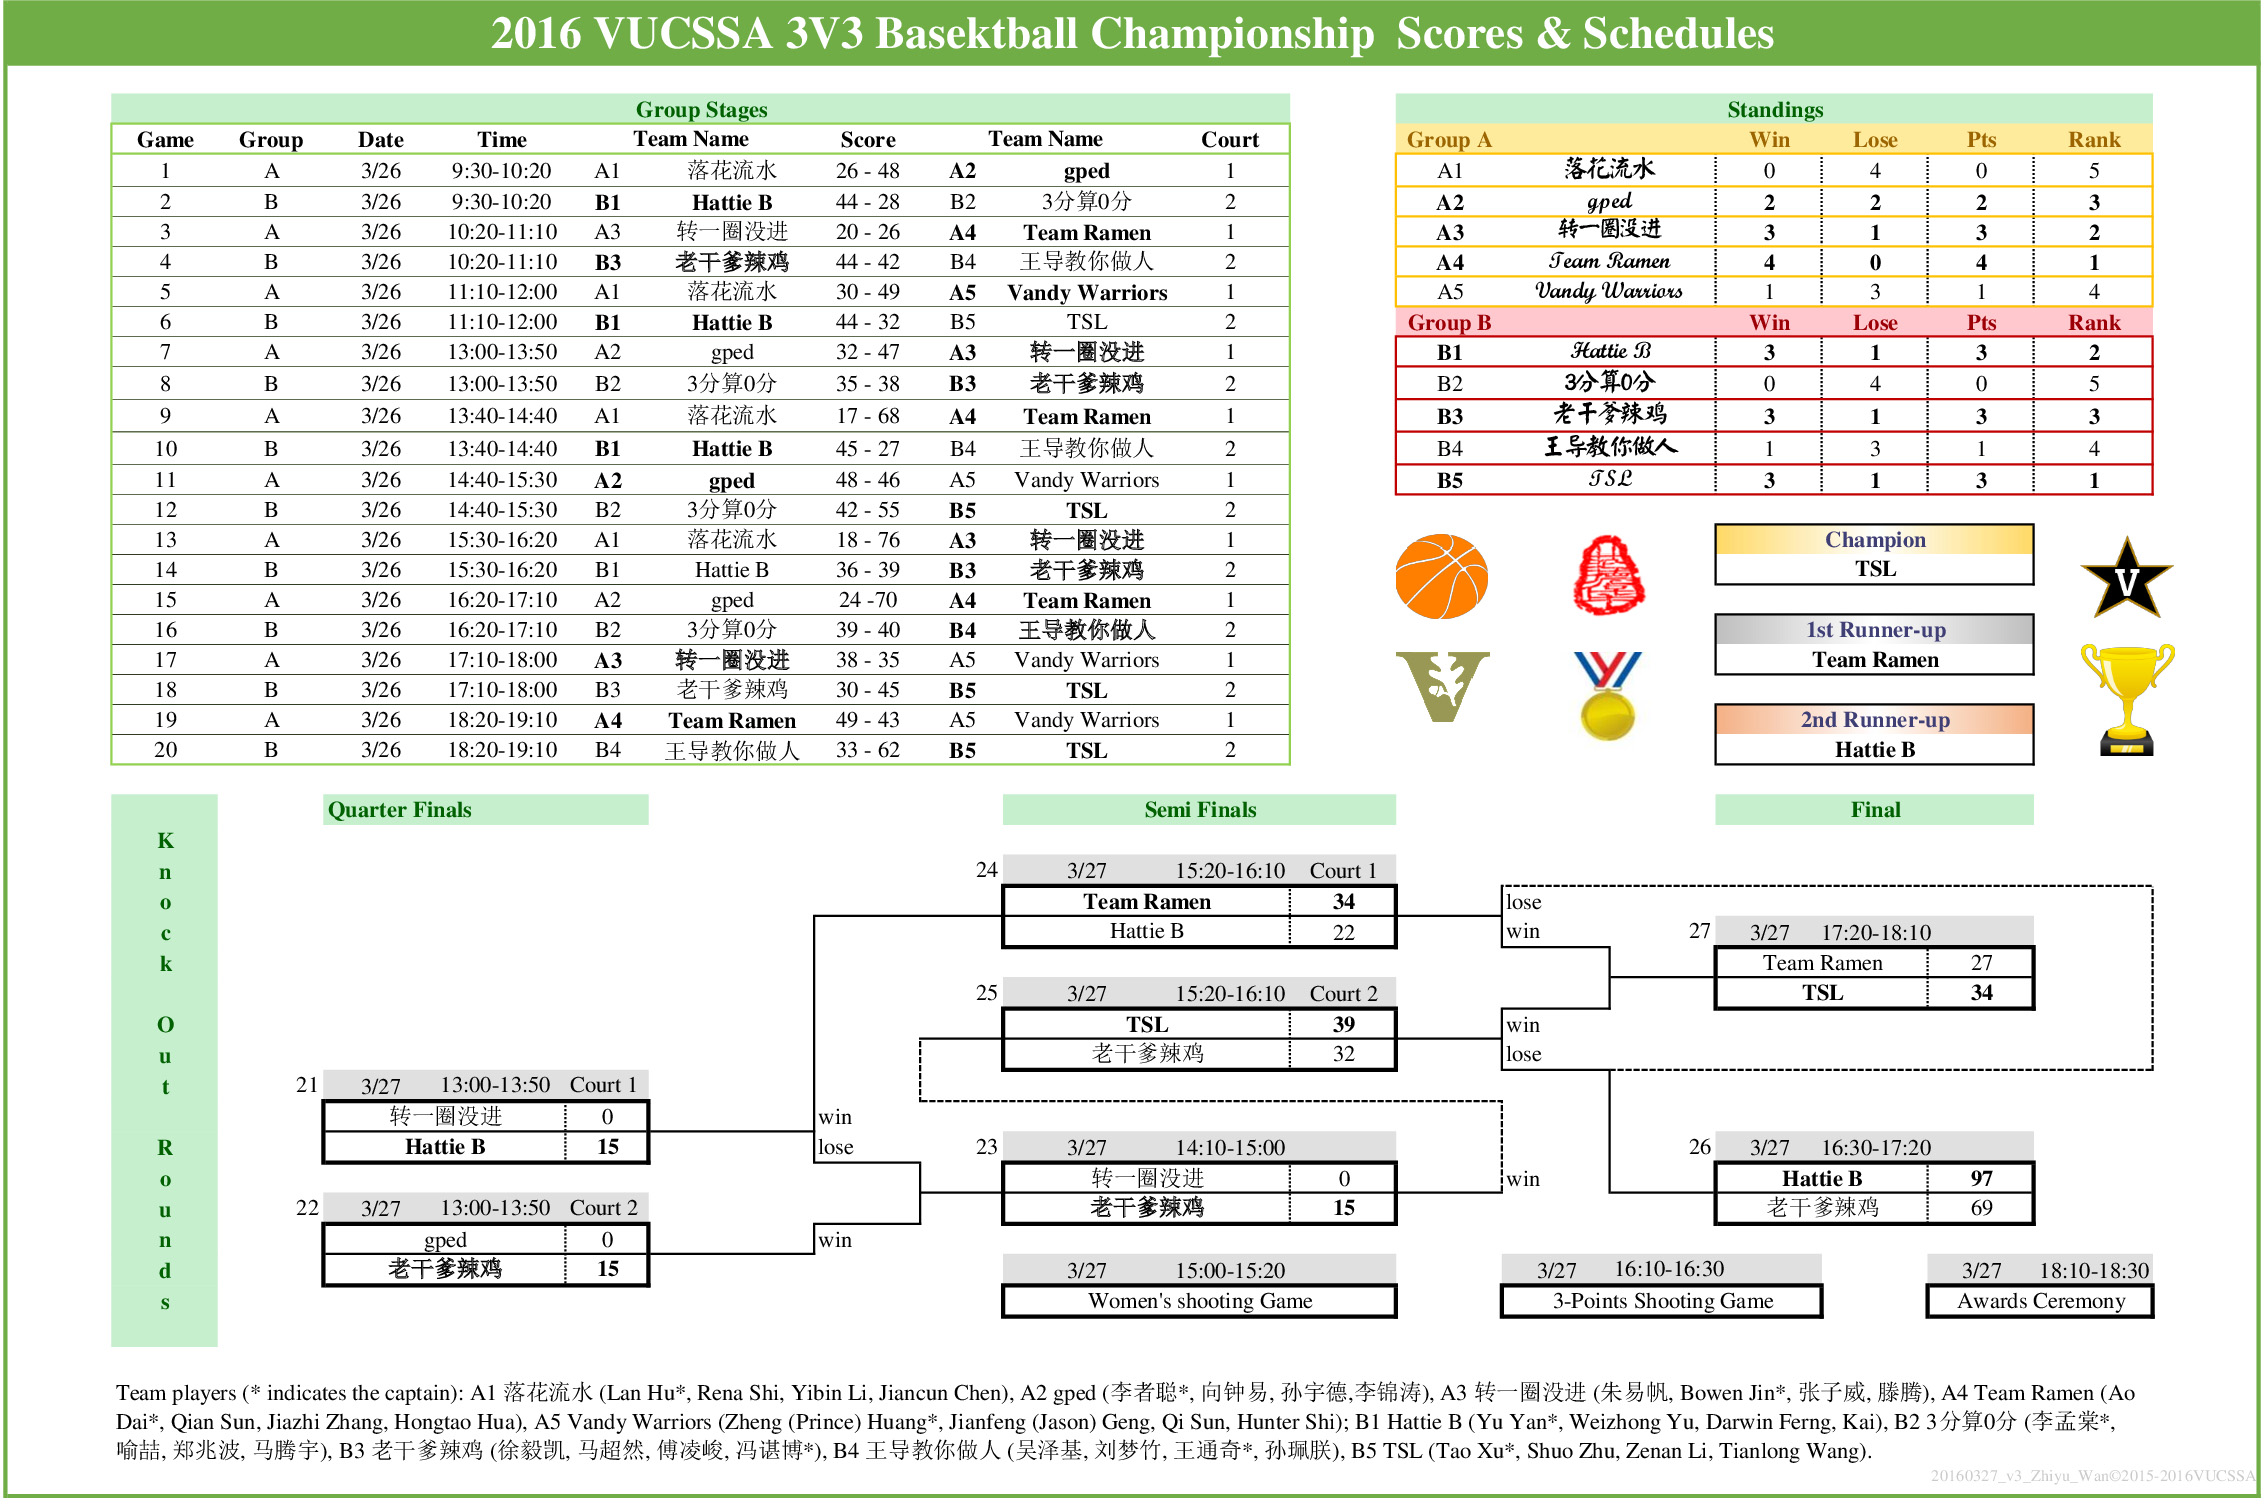 3v3 Basketball Championship Scores and Schedules